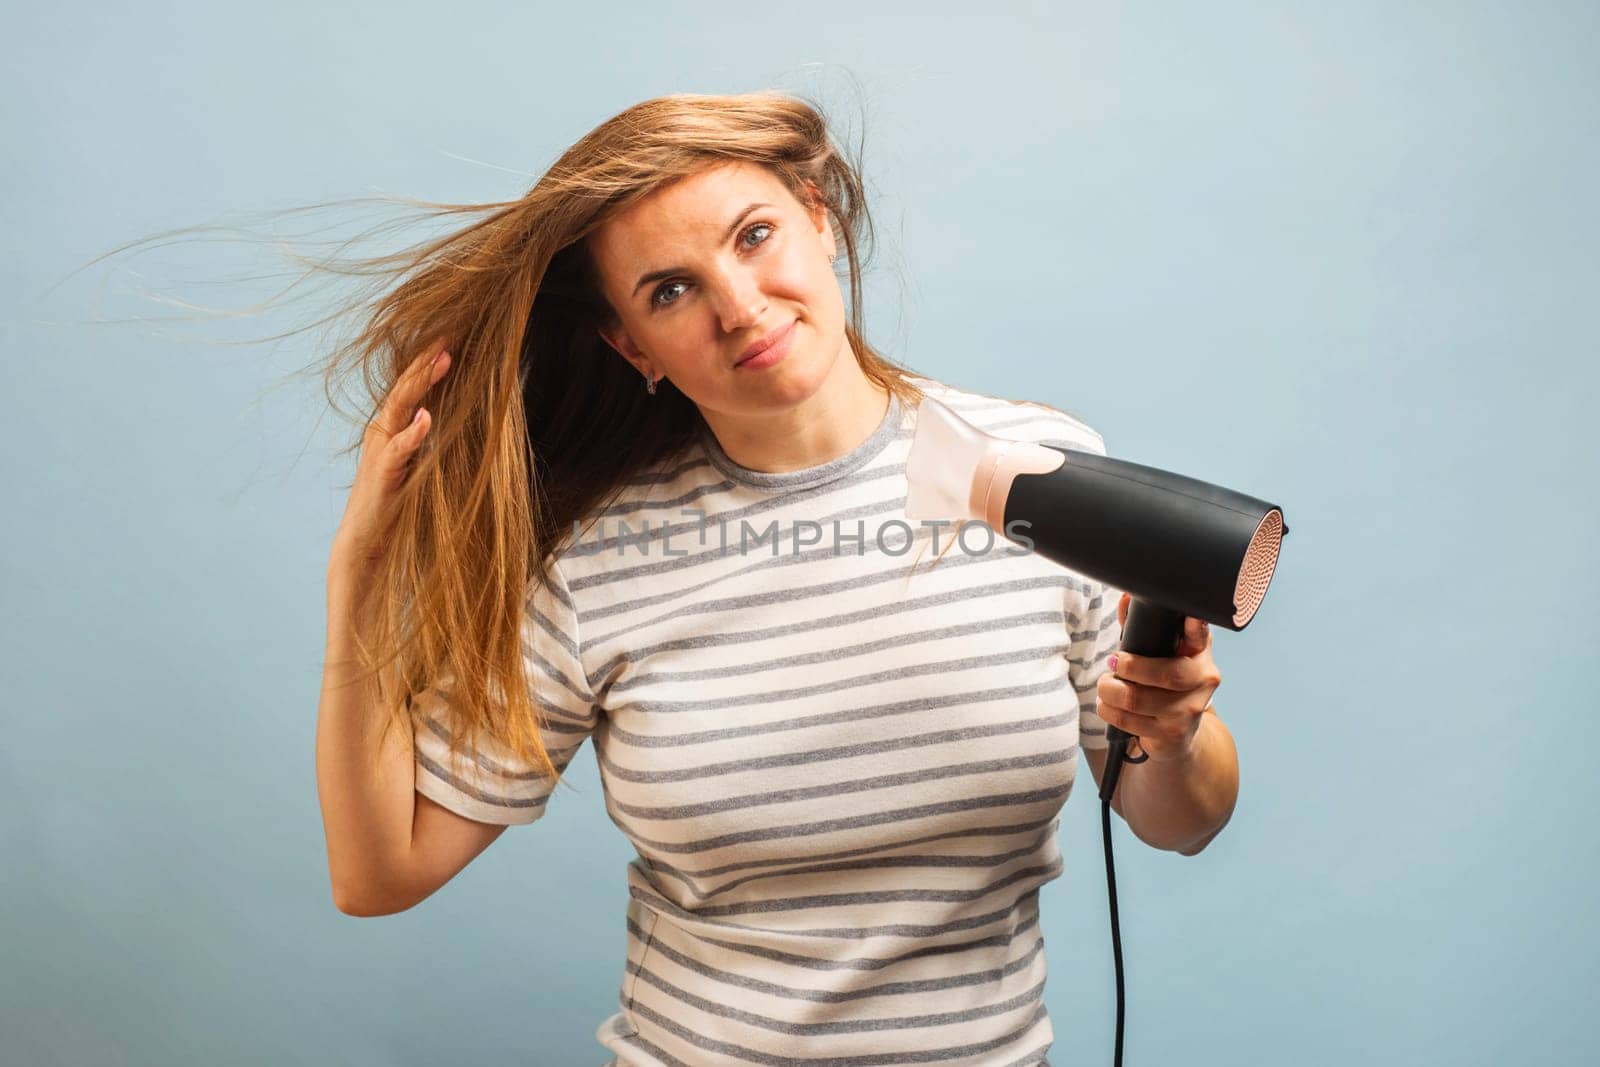 Young smiling woman using hair dryer on blue background. Hair style, hair care concept